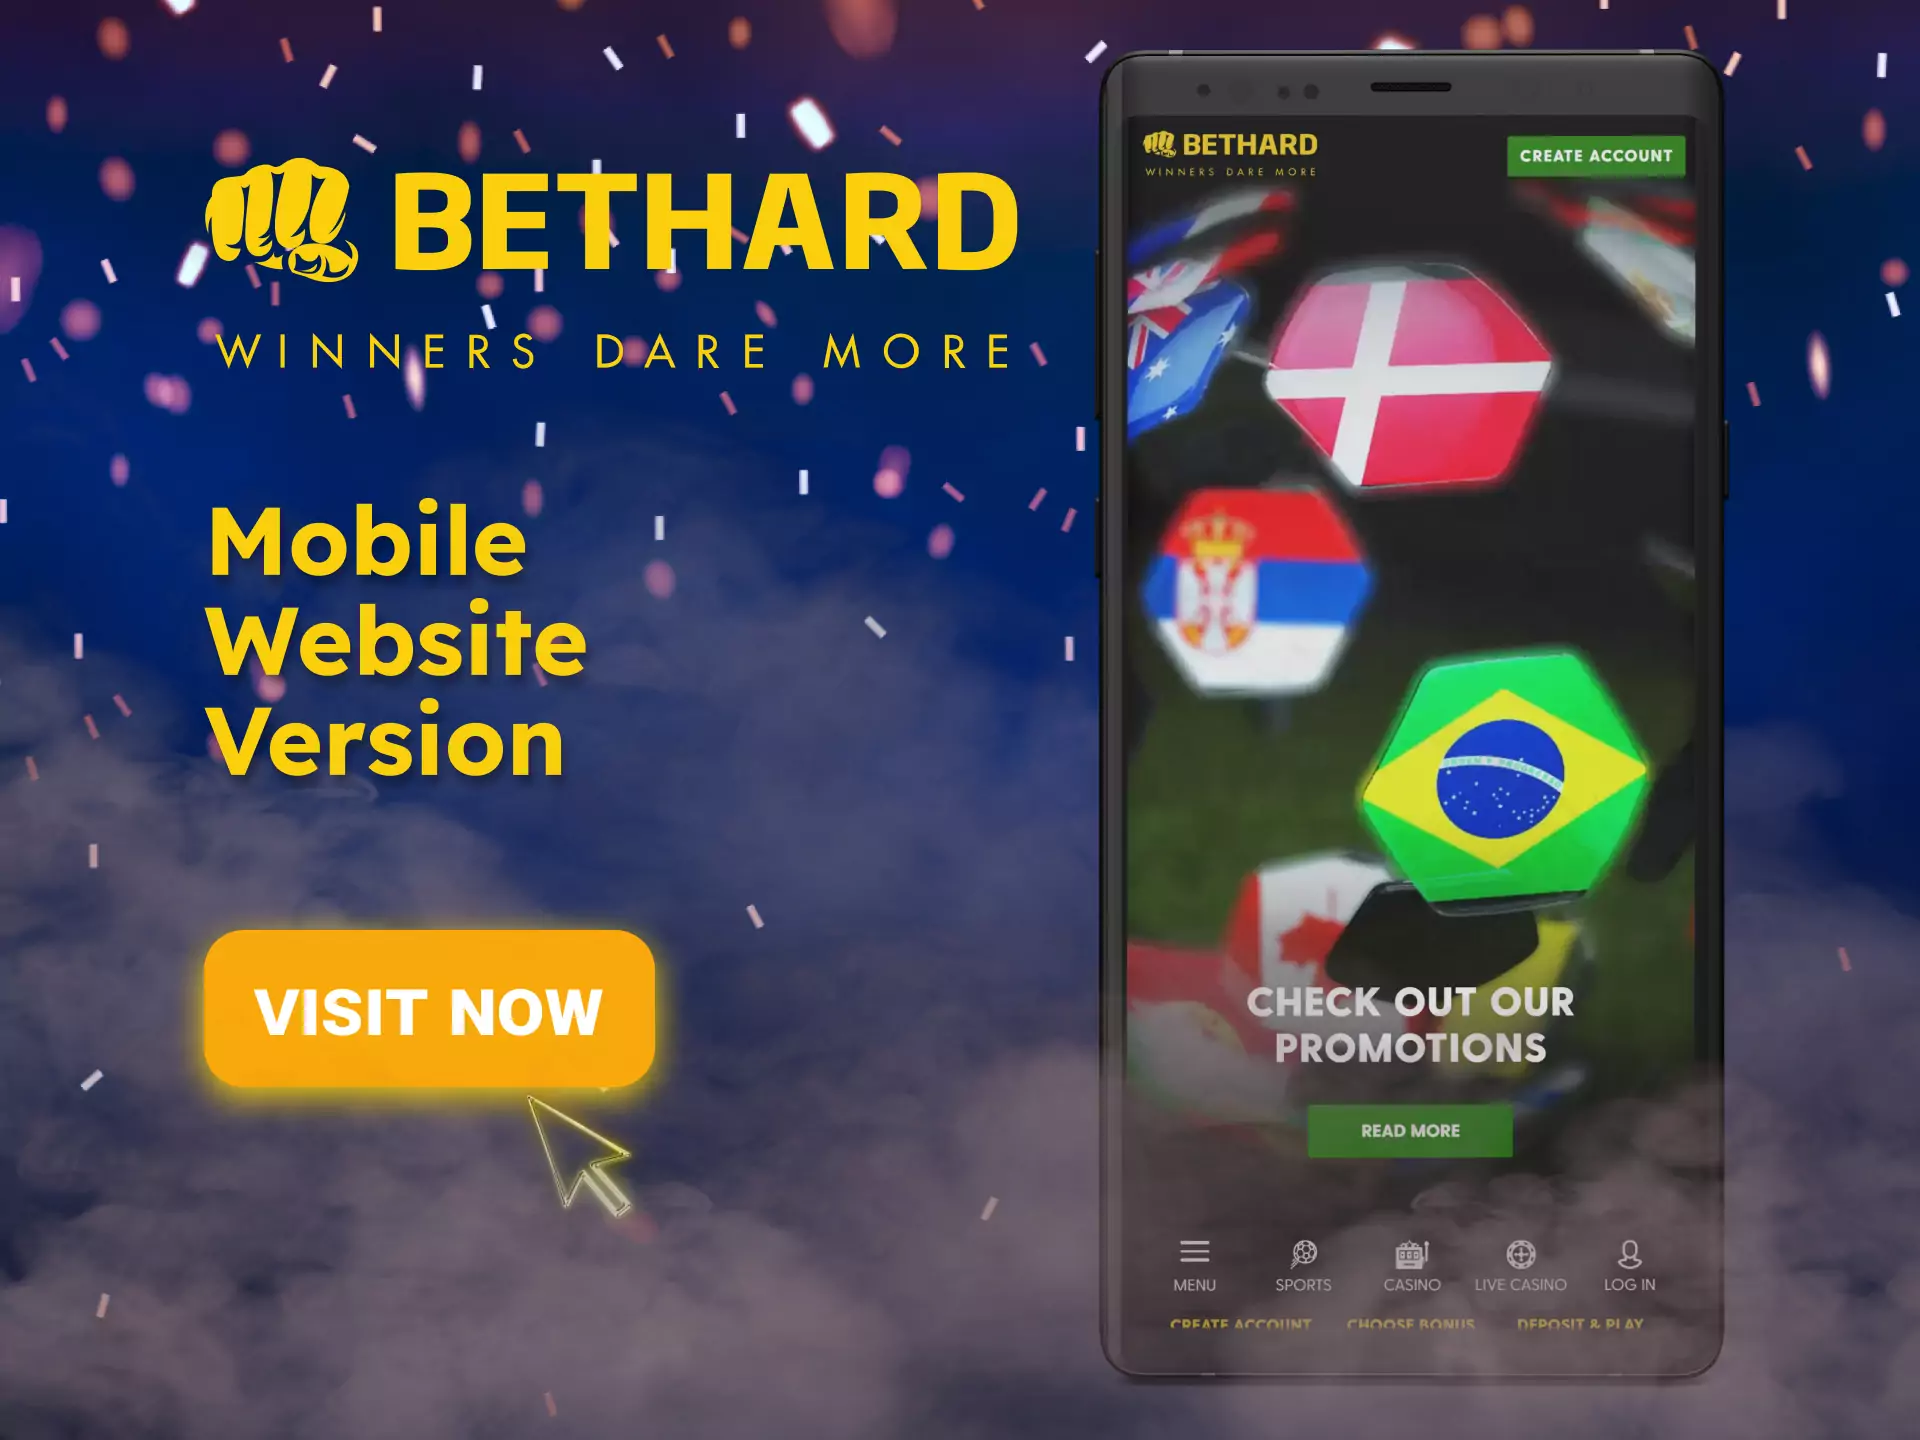 Place bets anywhere and at any time with the mobile version of the Bethard website.